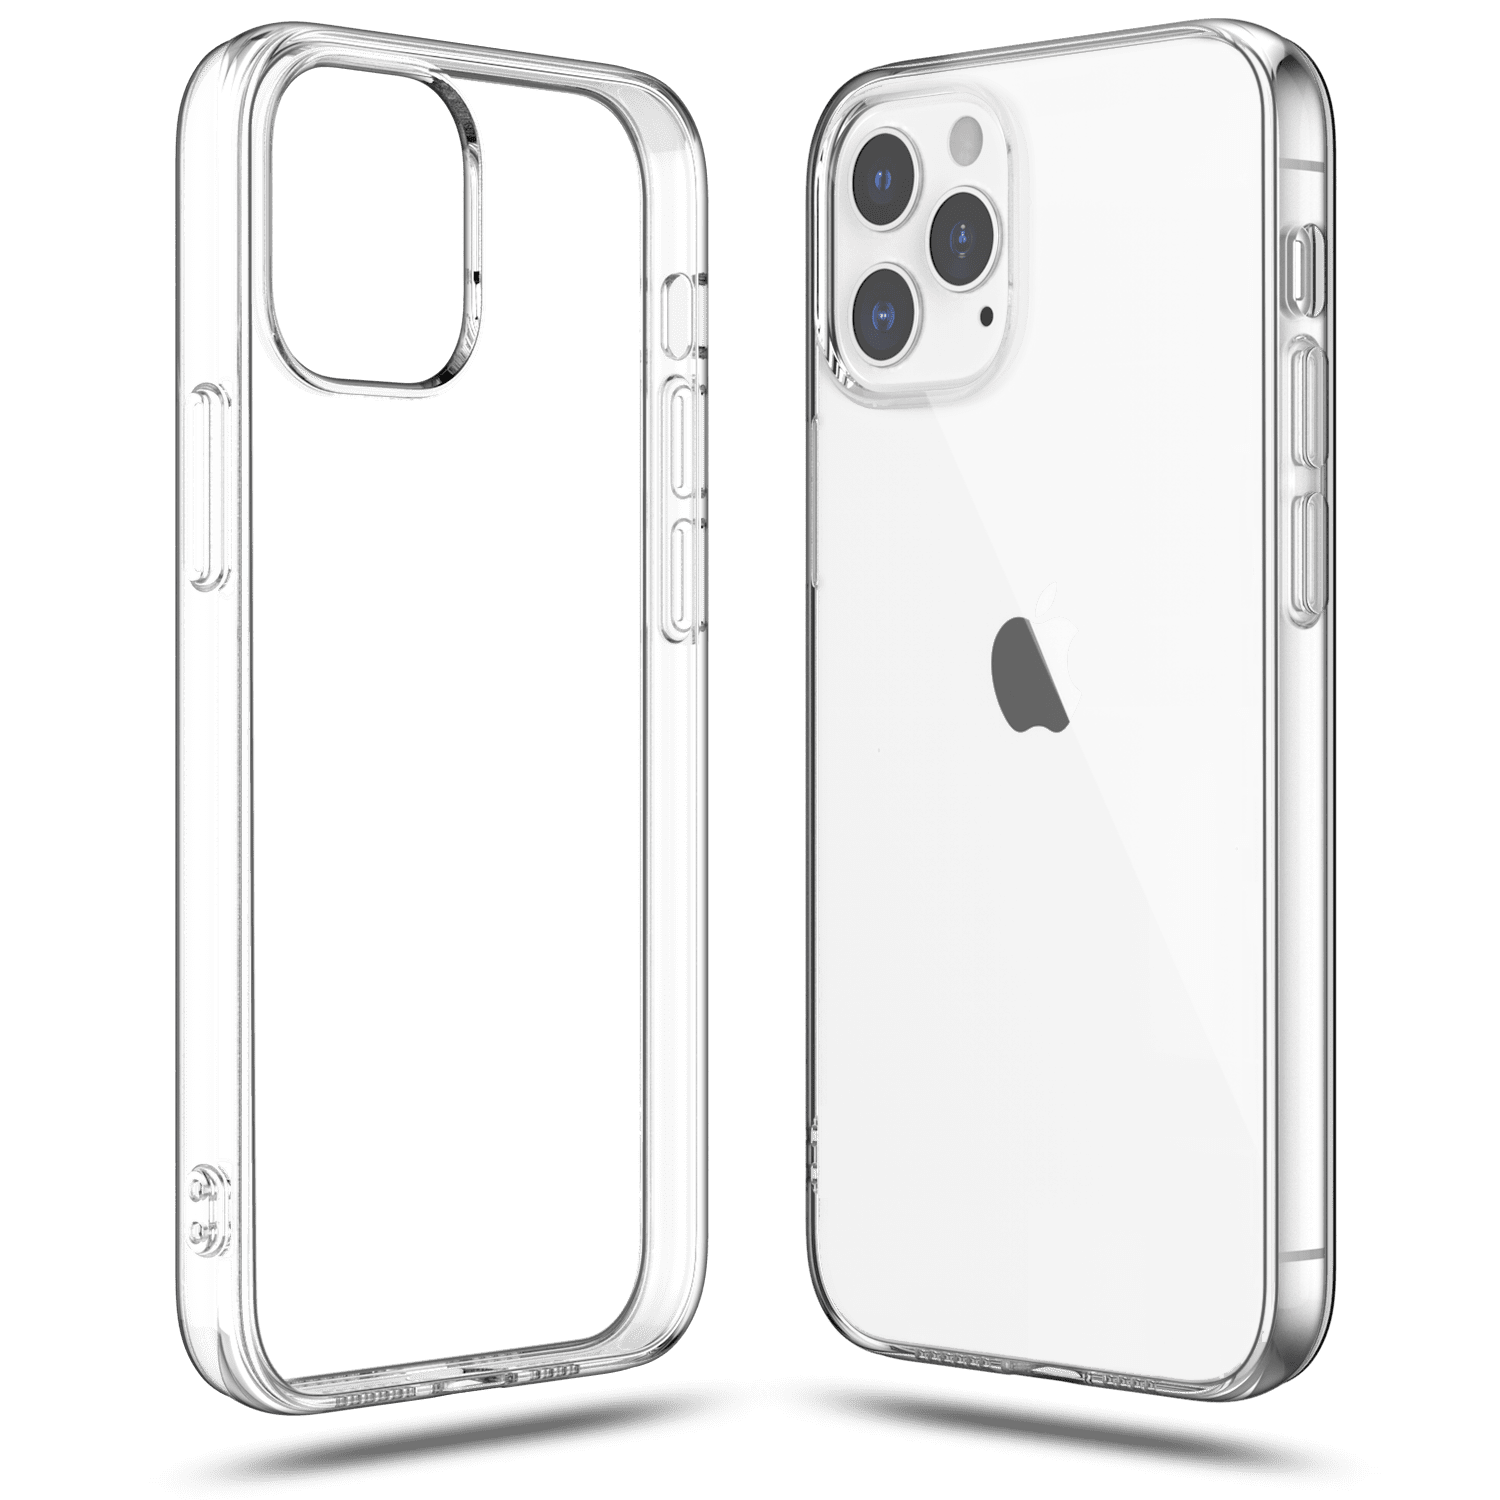 ANHONG Clear Frame Bumper Case Compatible with iPhone 12/12 Pro 6.1 inch,  Slim Fit Ultra Thin Super Light PC + Soft TPU No-Back Case